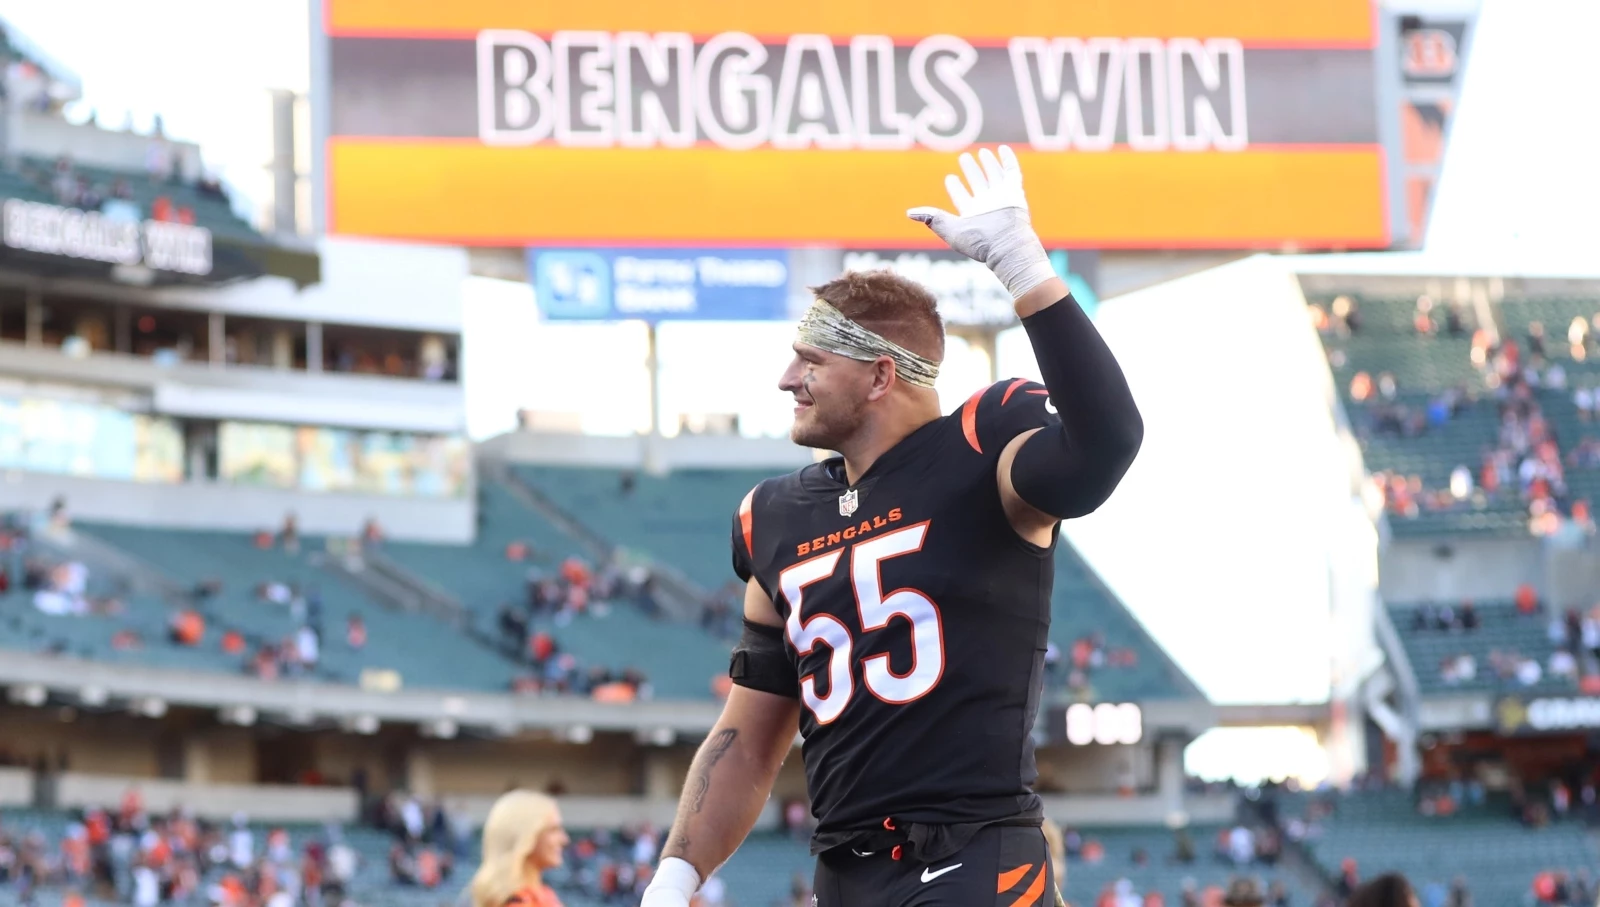 Wyoming's Logan Wilson has Bengals Fans Crooning in His Honor